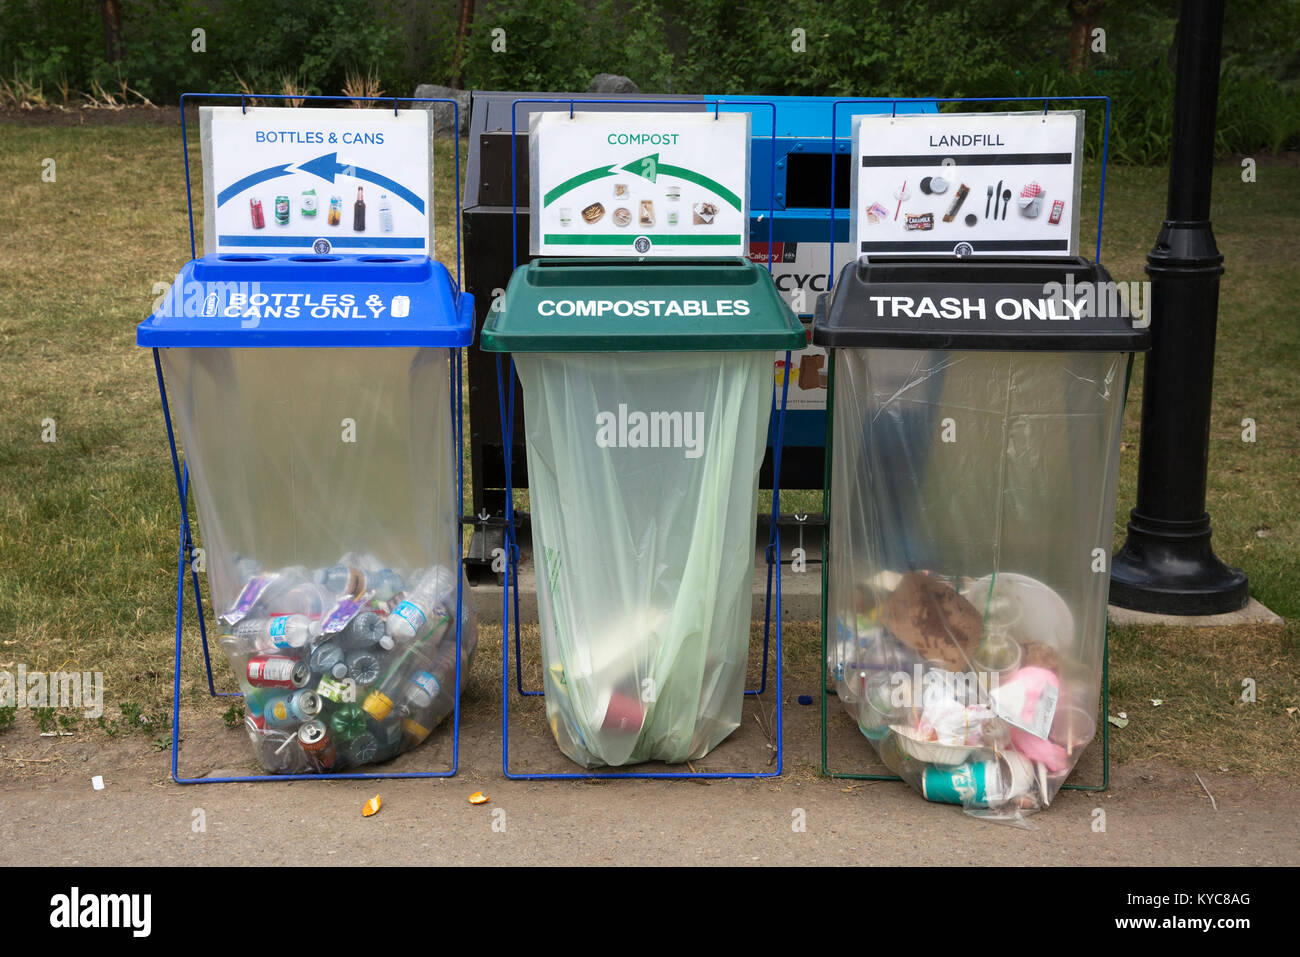 Disposal bins for bottles and cans recycling, compostables and trash in a green city. Stock Photo